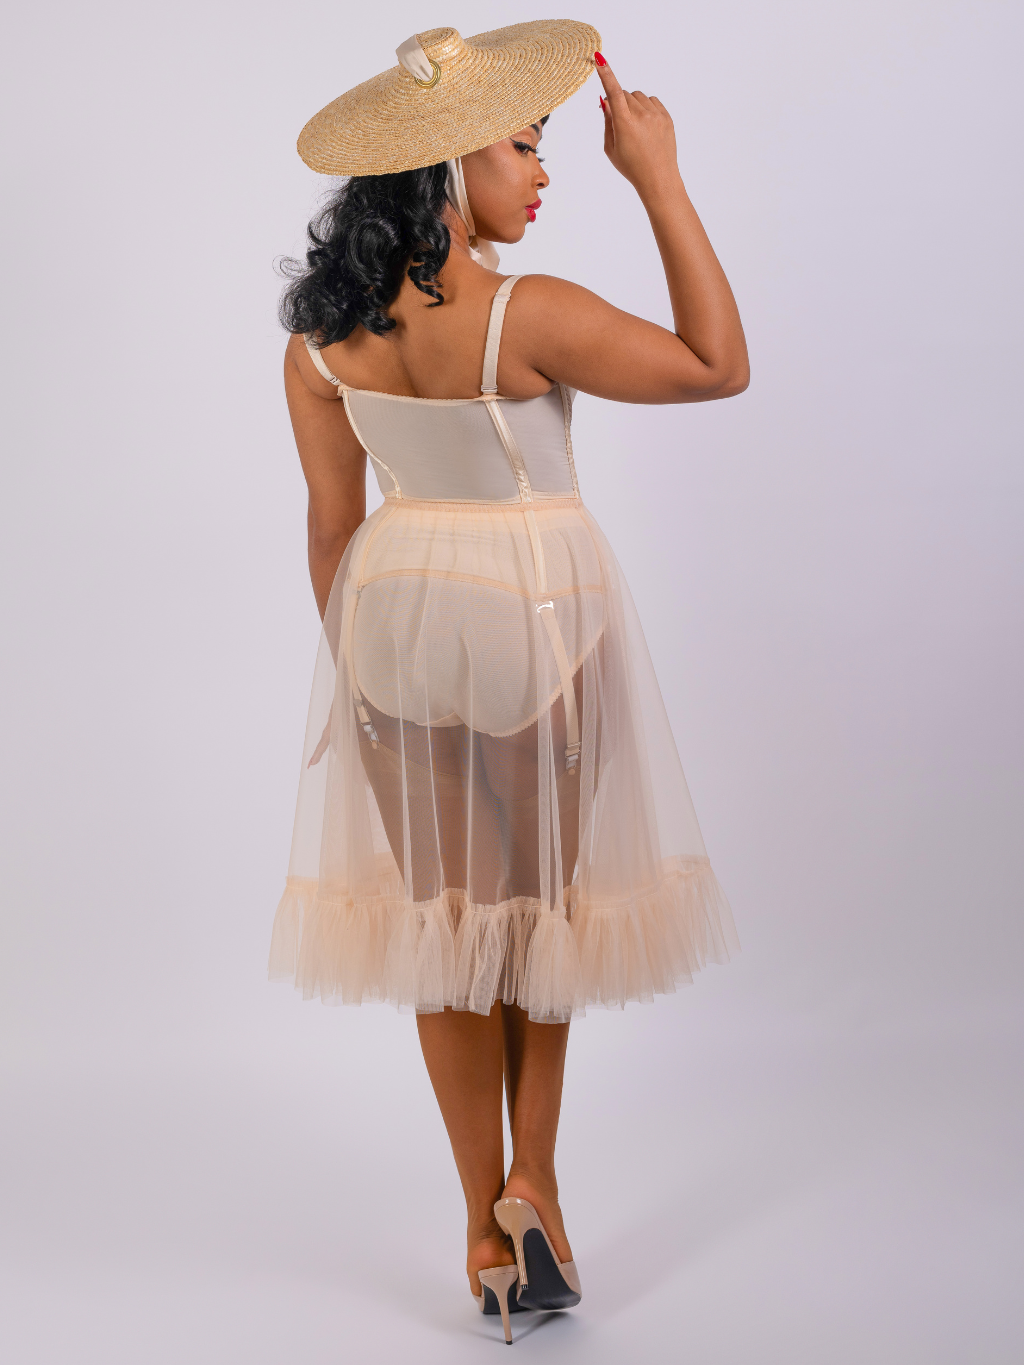 back view of sheer nylon frilly petticoat in vintage peach nylon worn with matching 1950s lingerie and nylon  stockings